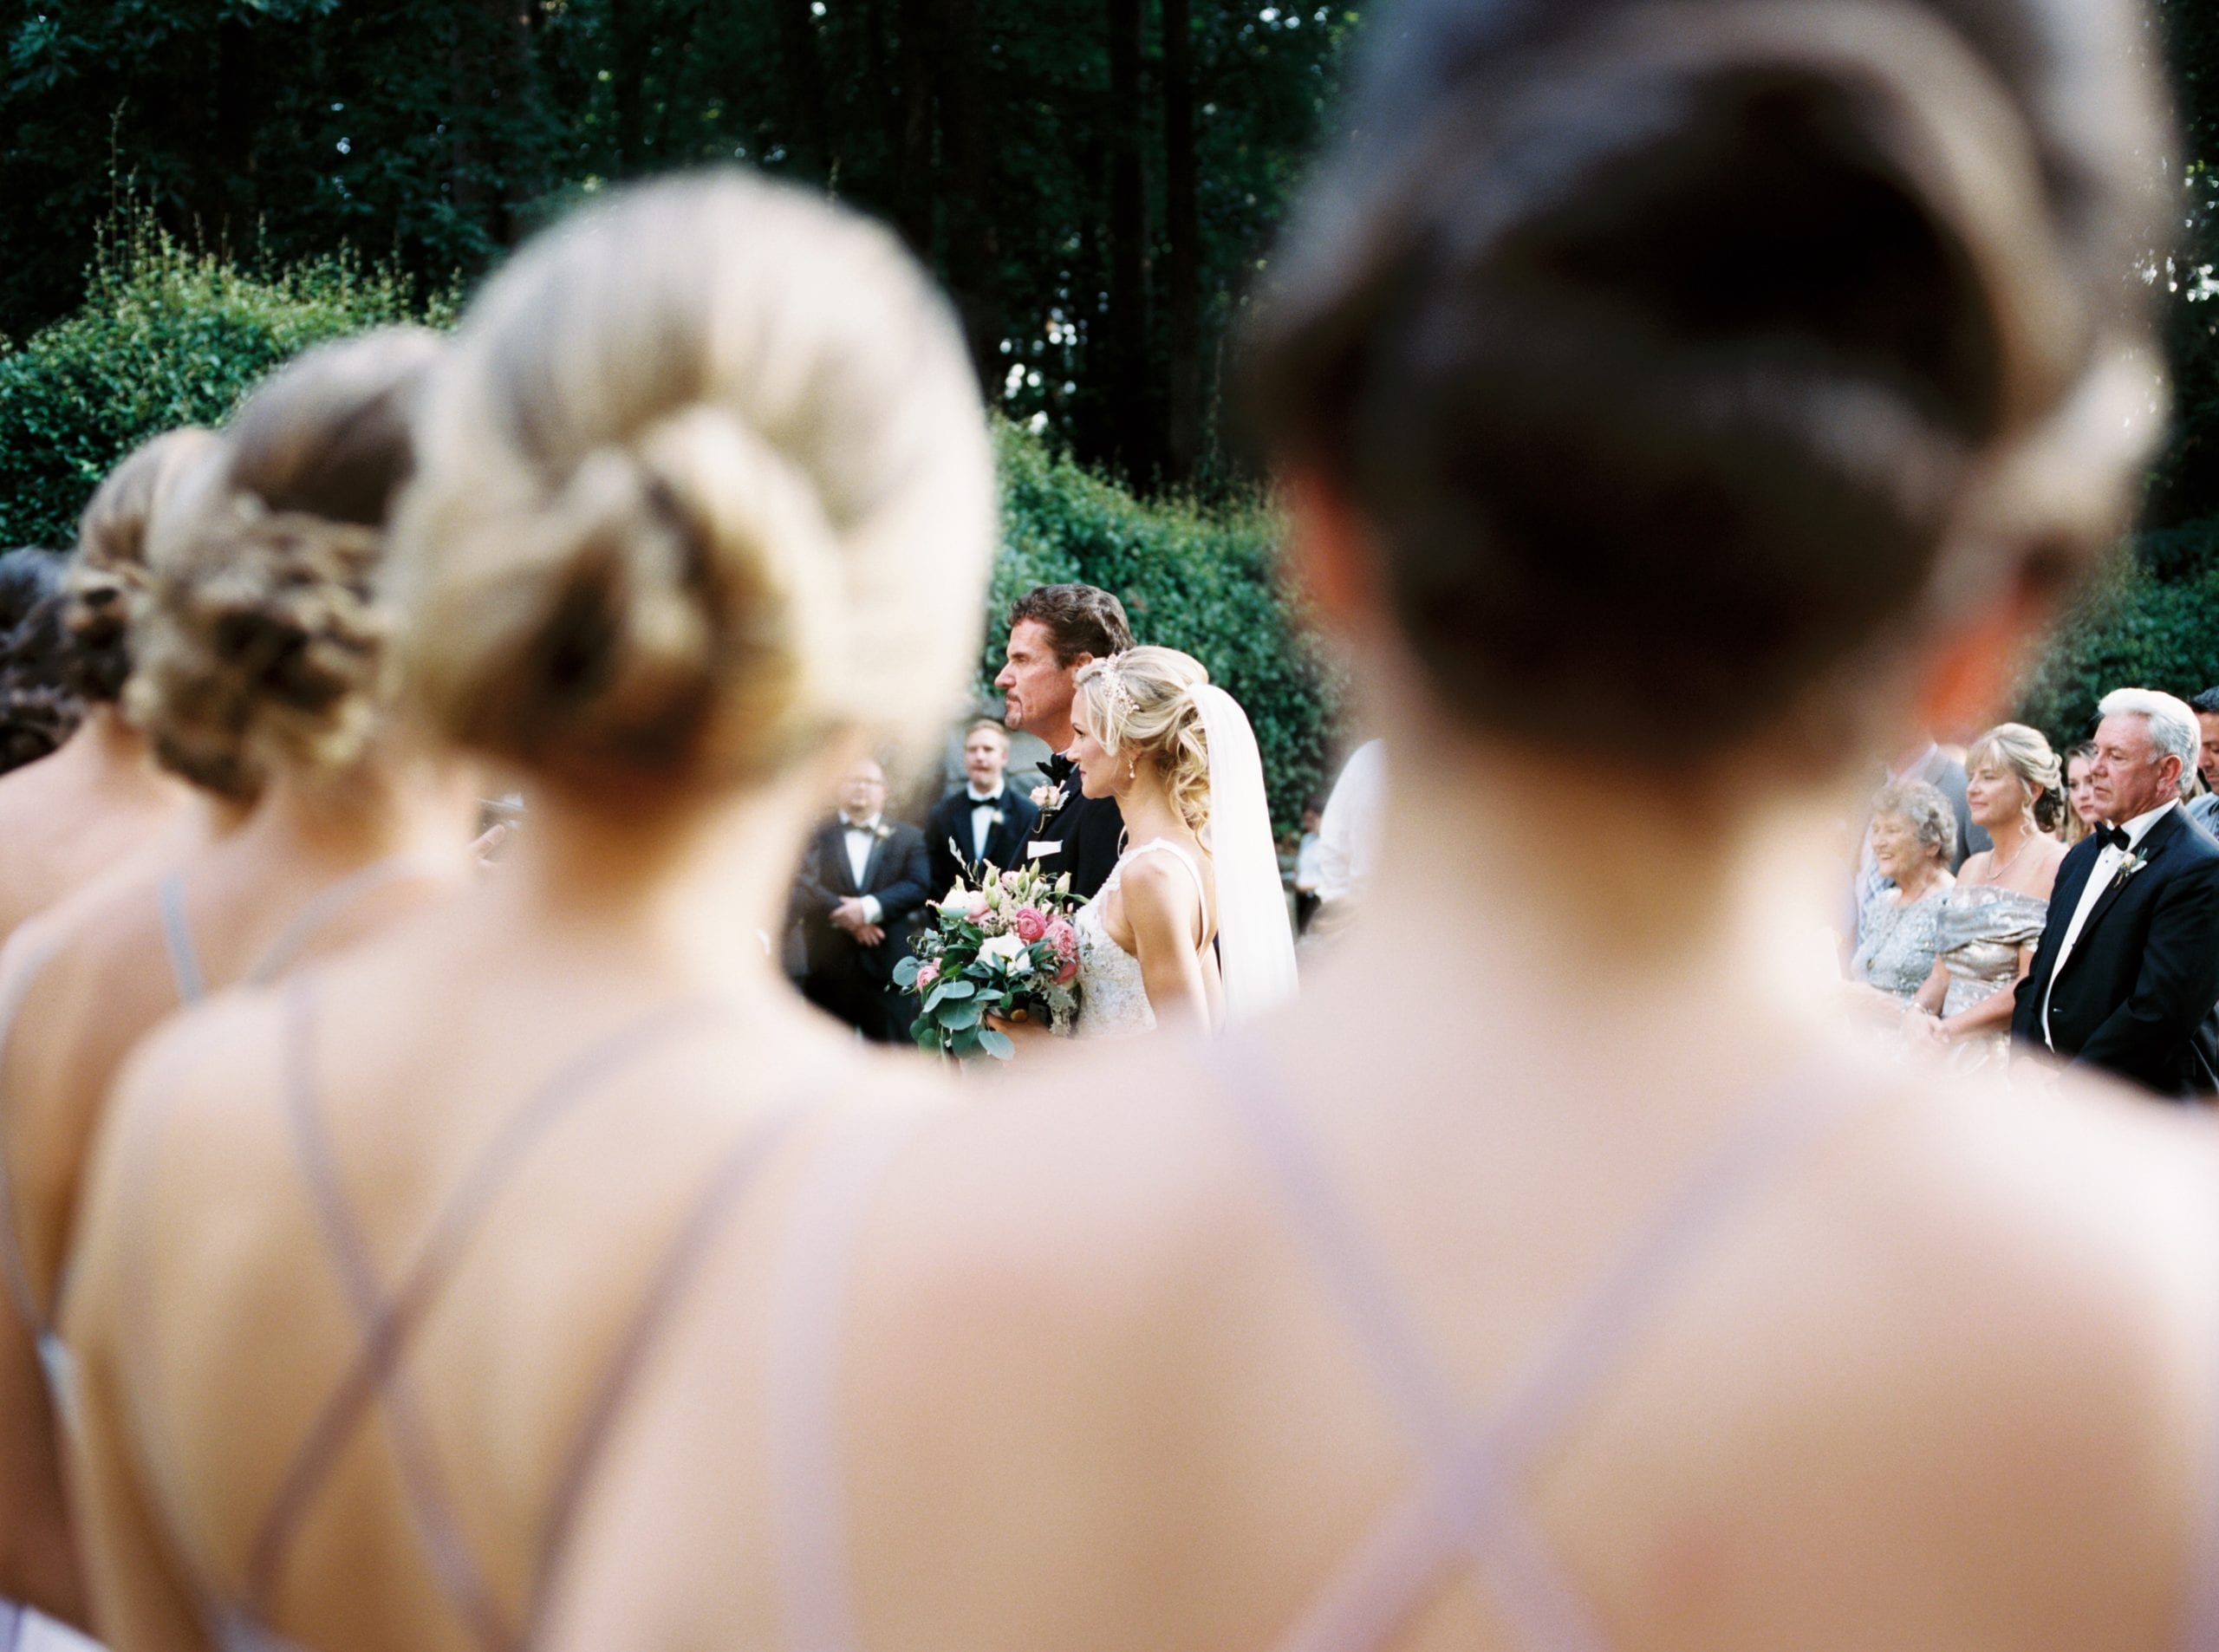 A bridesmaid's view of a swan house wedding ceremony held in the historic gardens in front of the coach house.